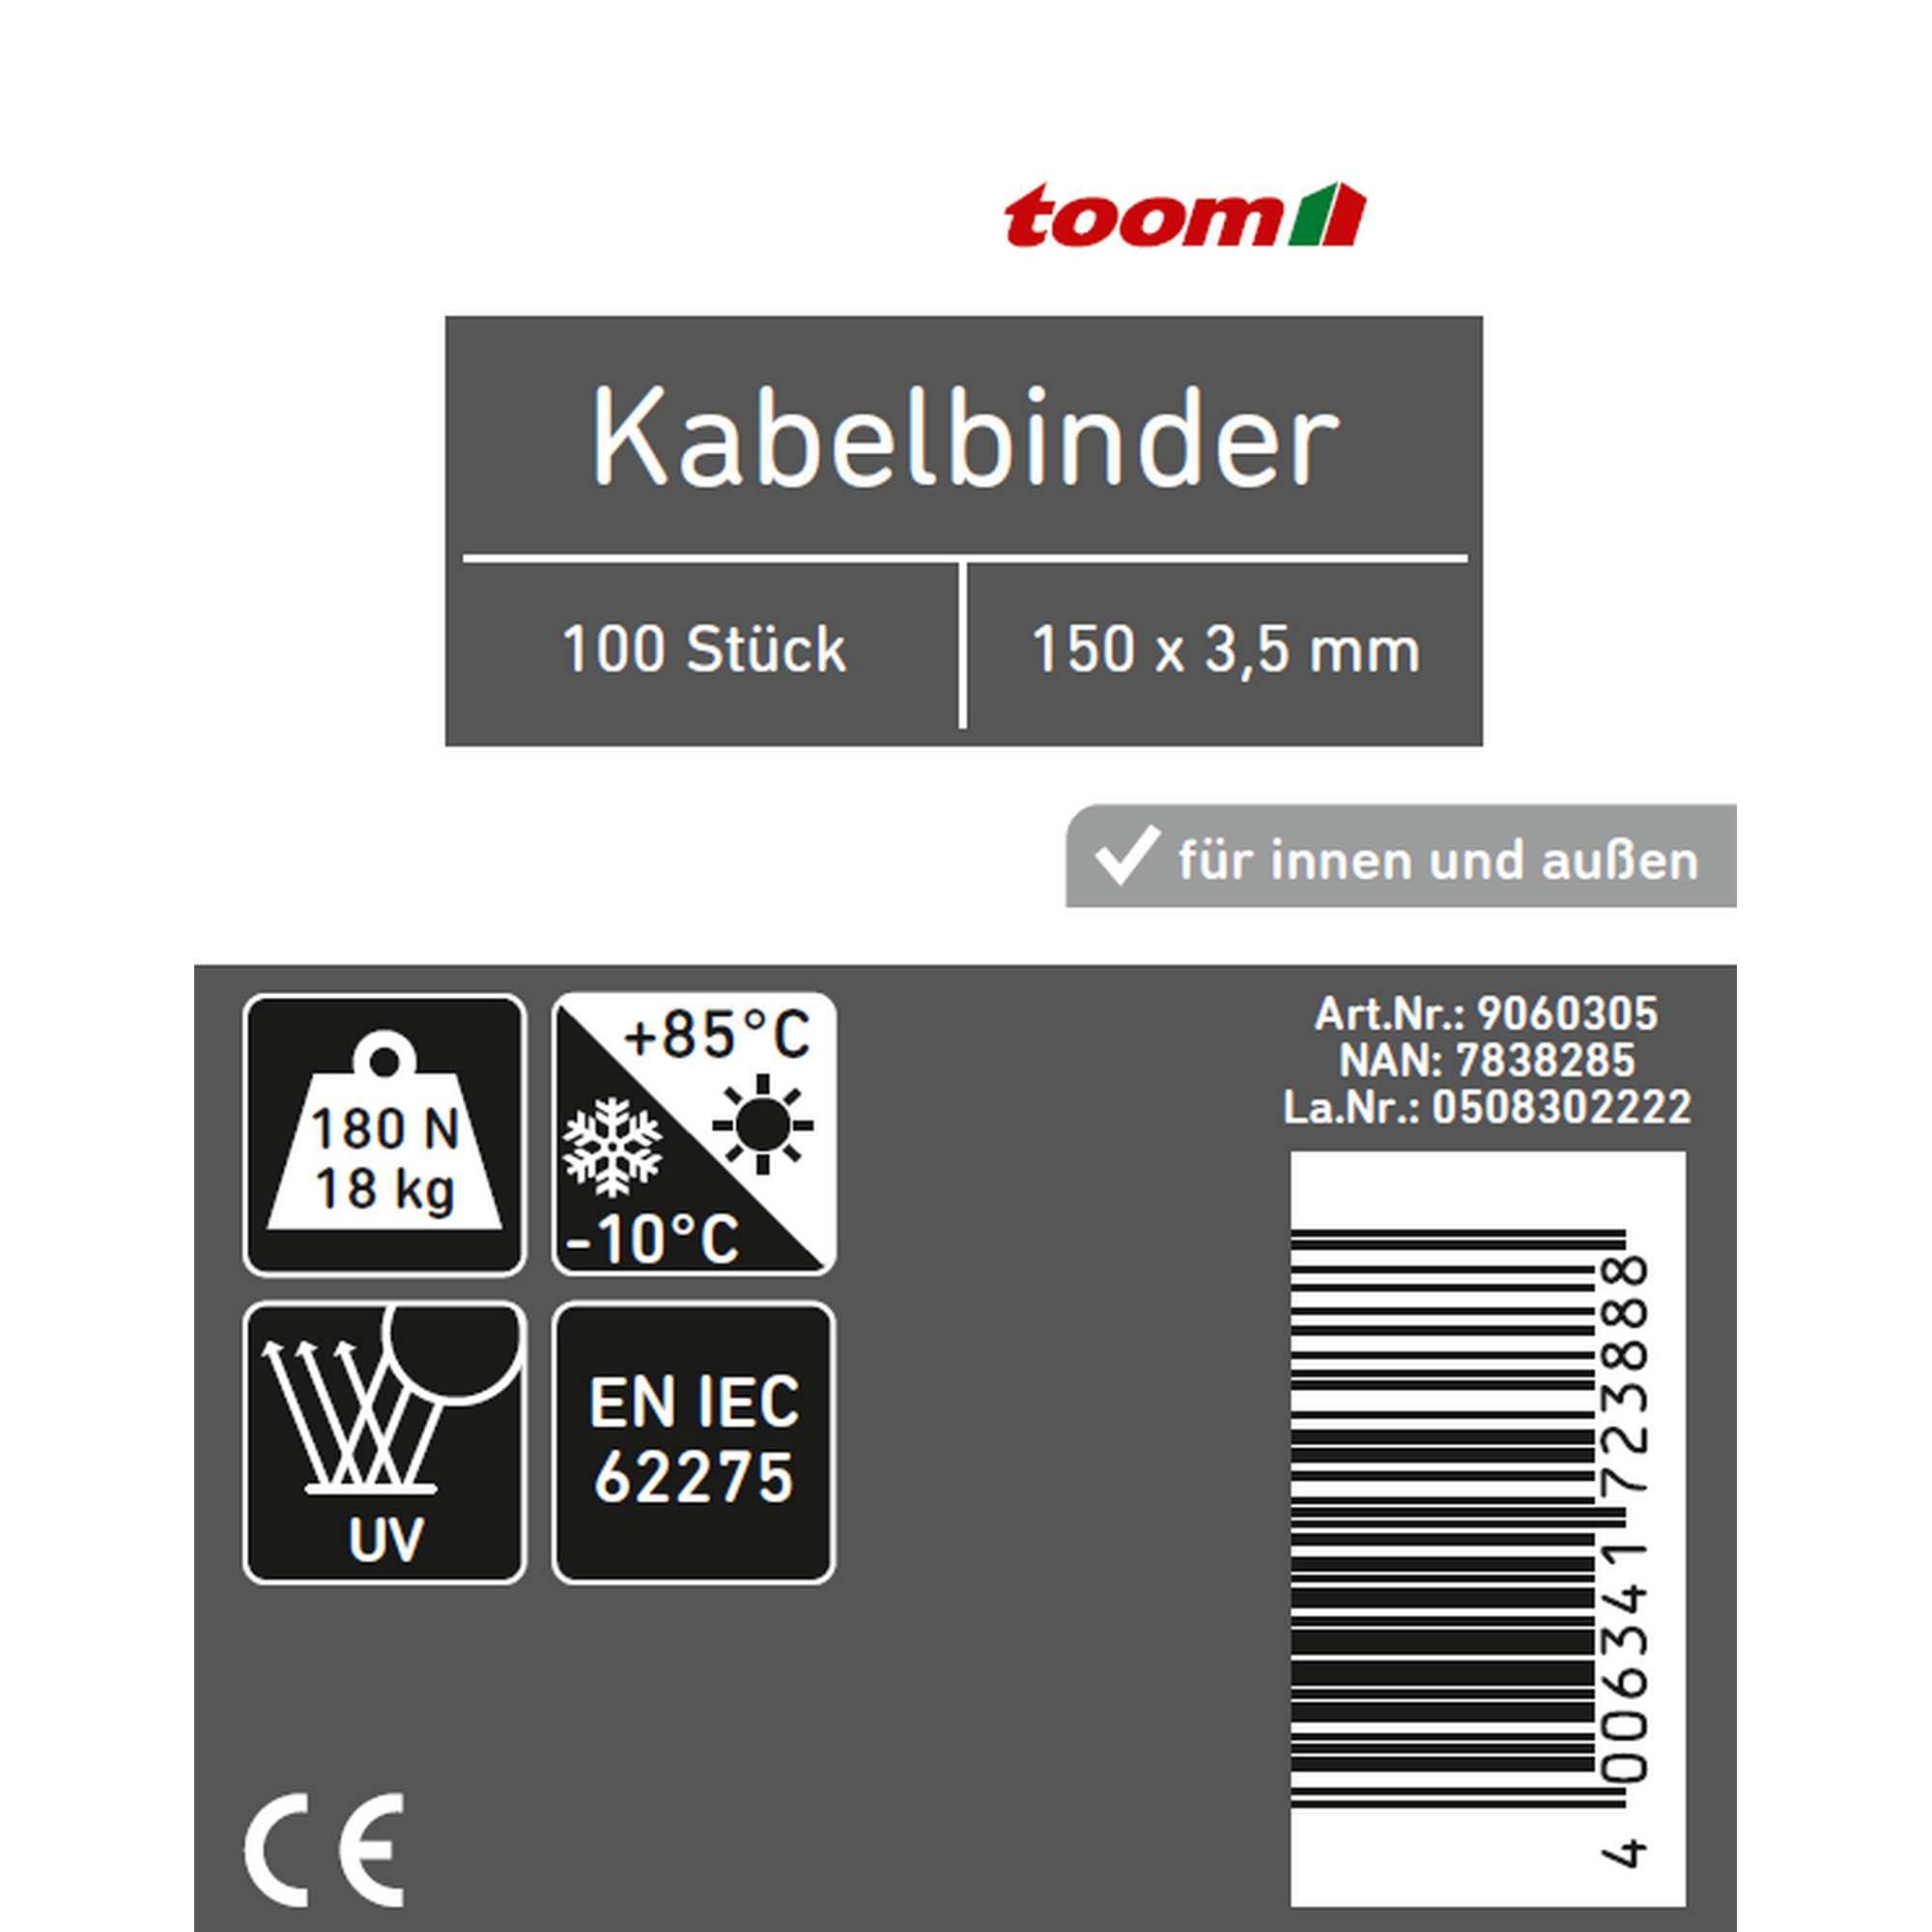 Kabelbinder bunt 3,5 x 150 mm 100 Stück + product picture